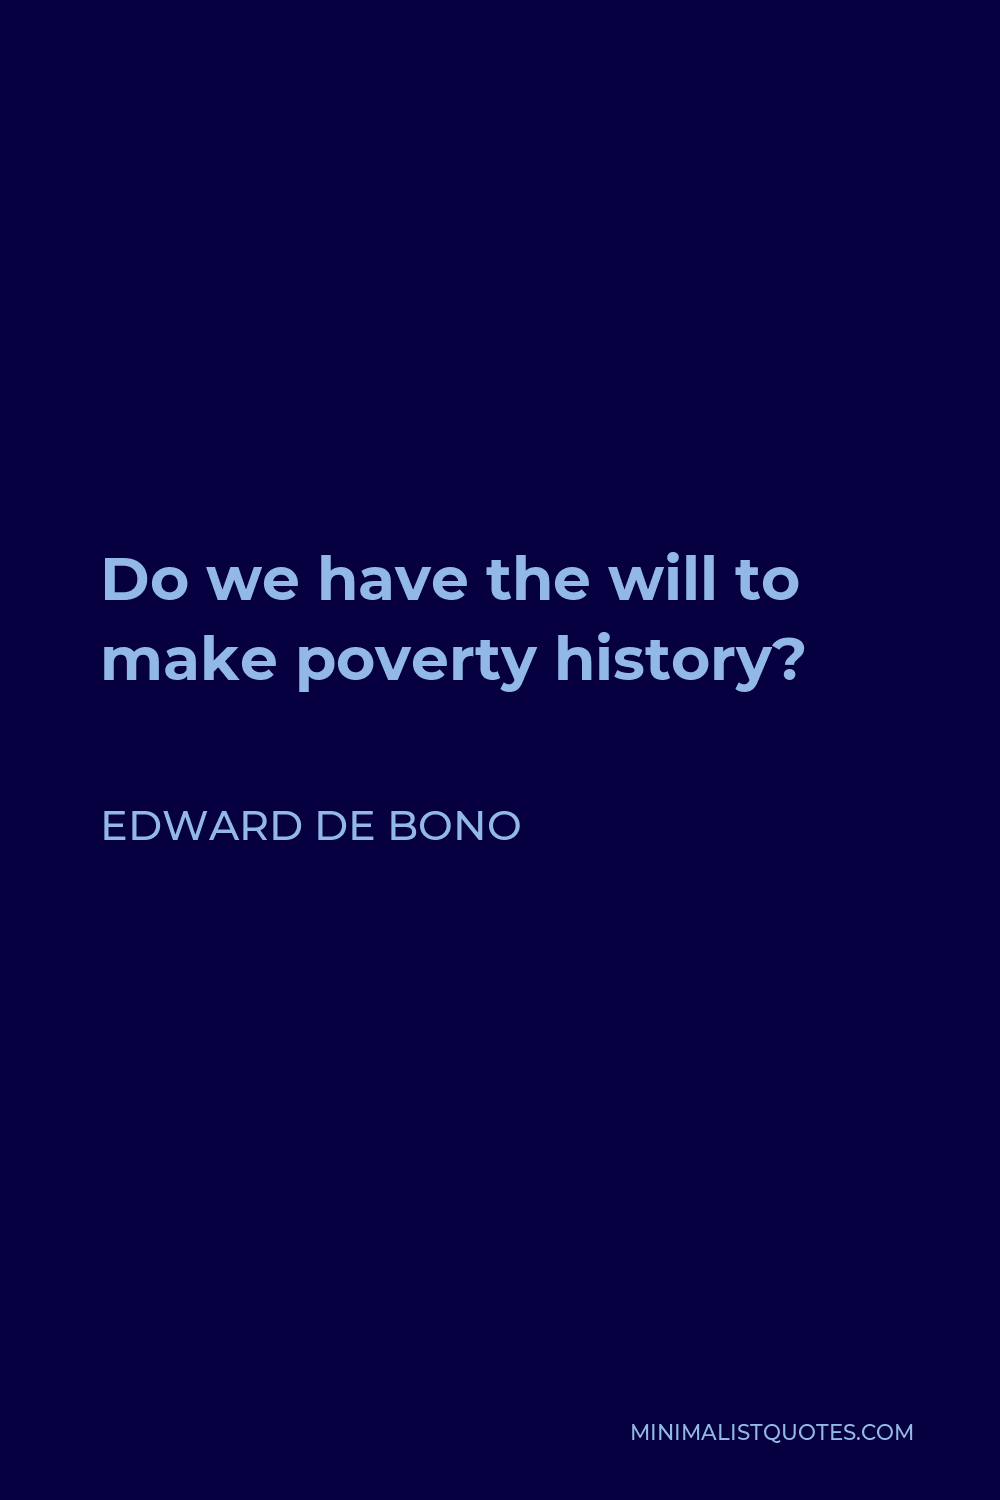 Edward de Bono Quote - Do we have the will to make poverty history?